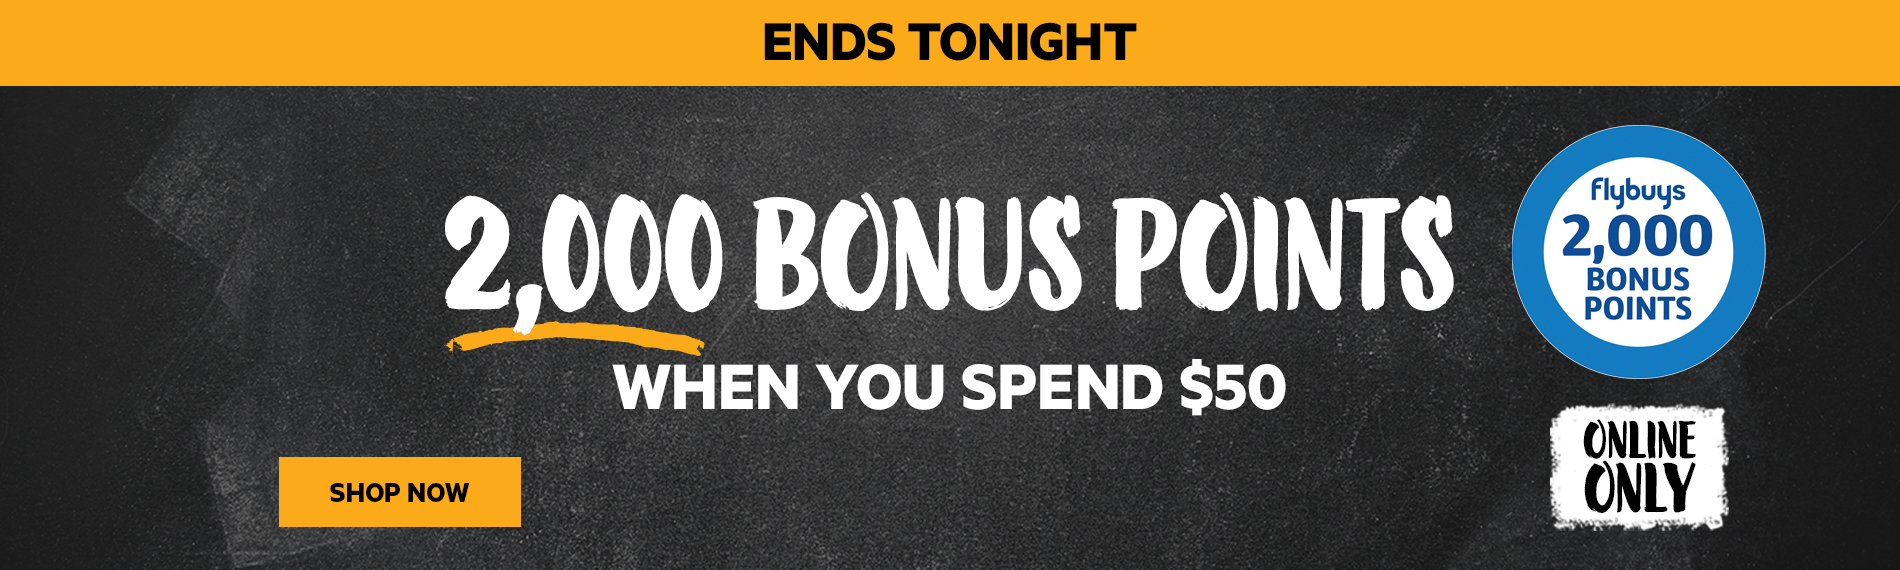 Collect 2,000 Flybuys Bonus Points with $50 spend